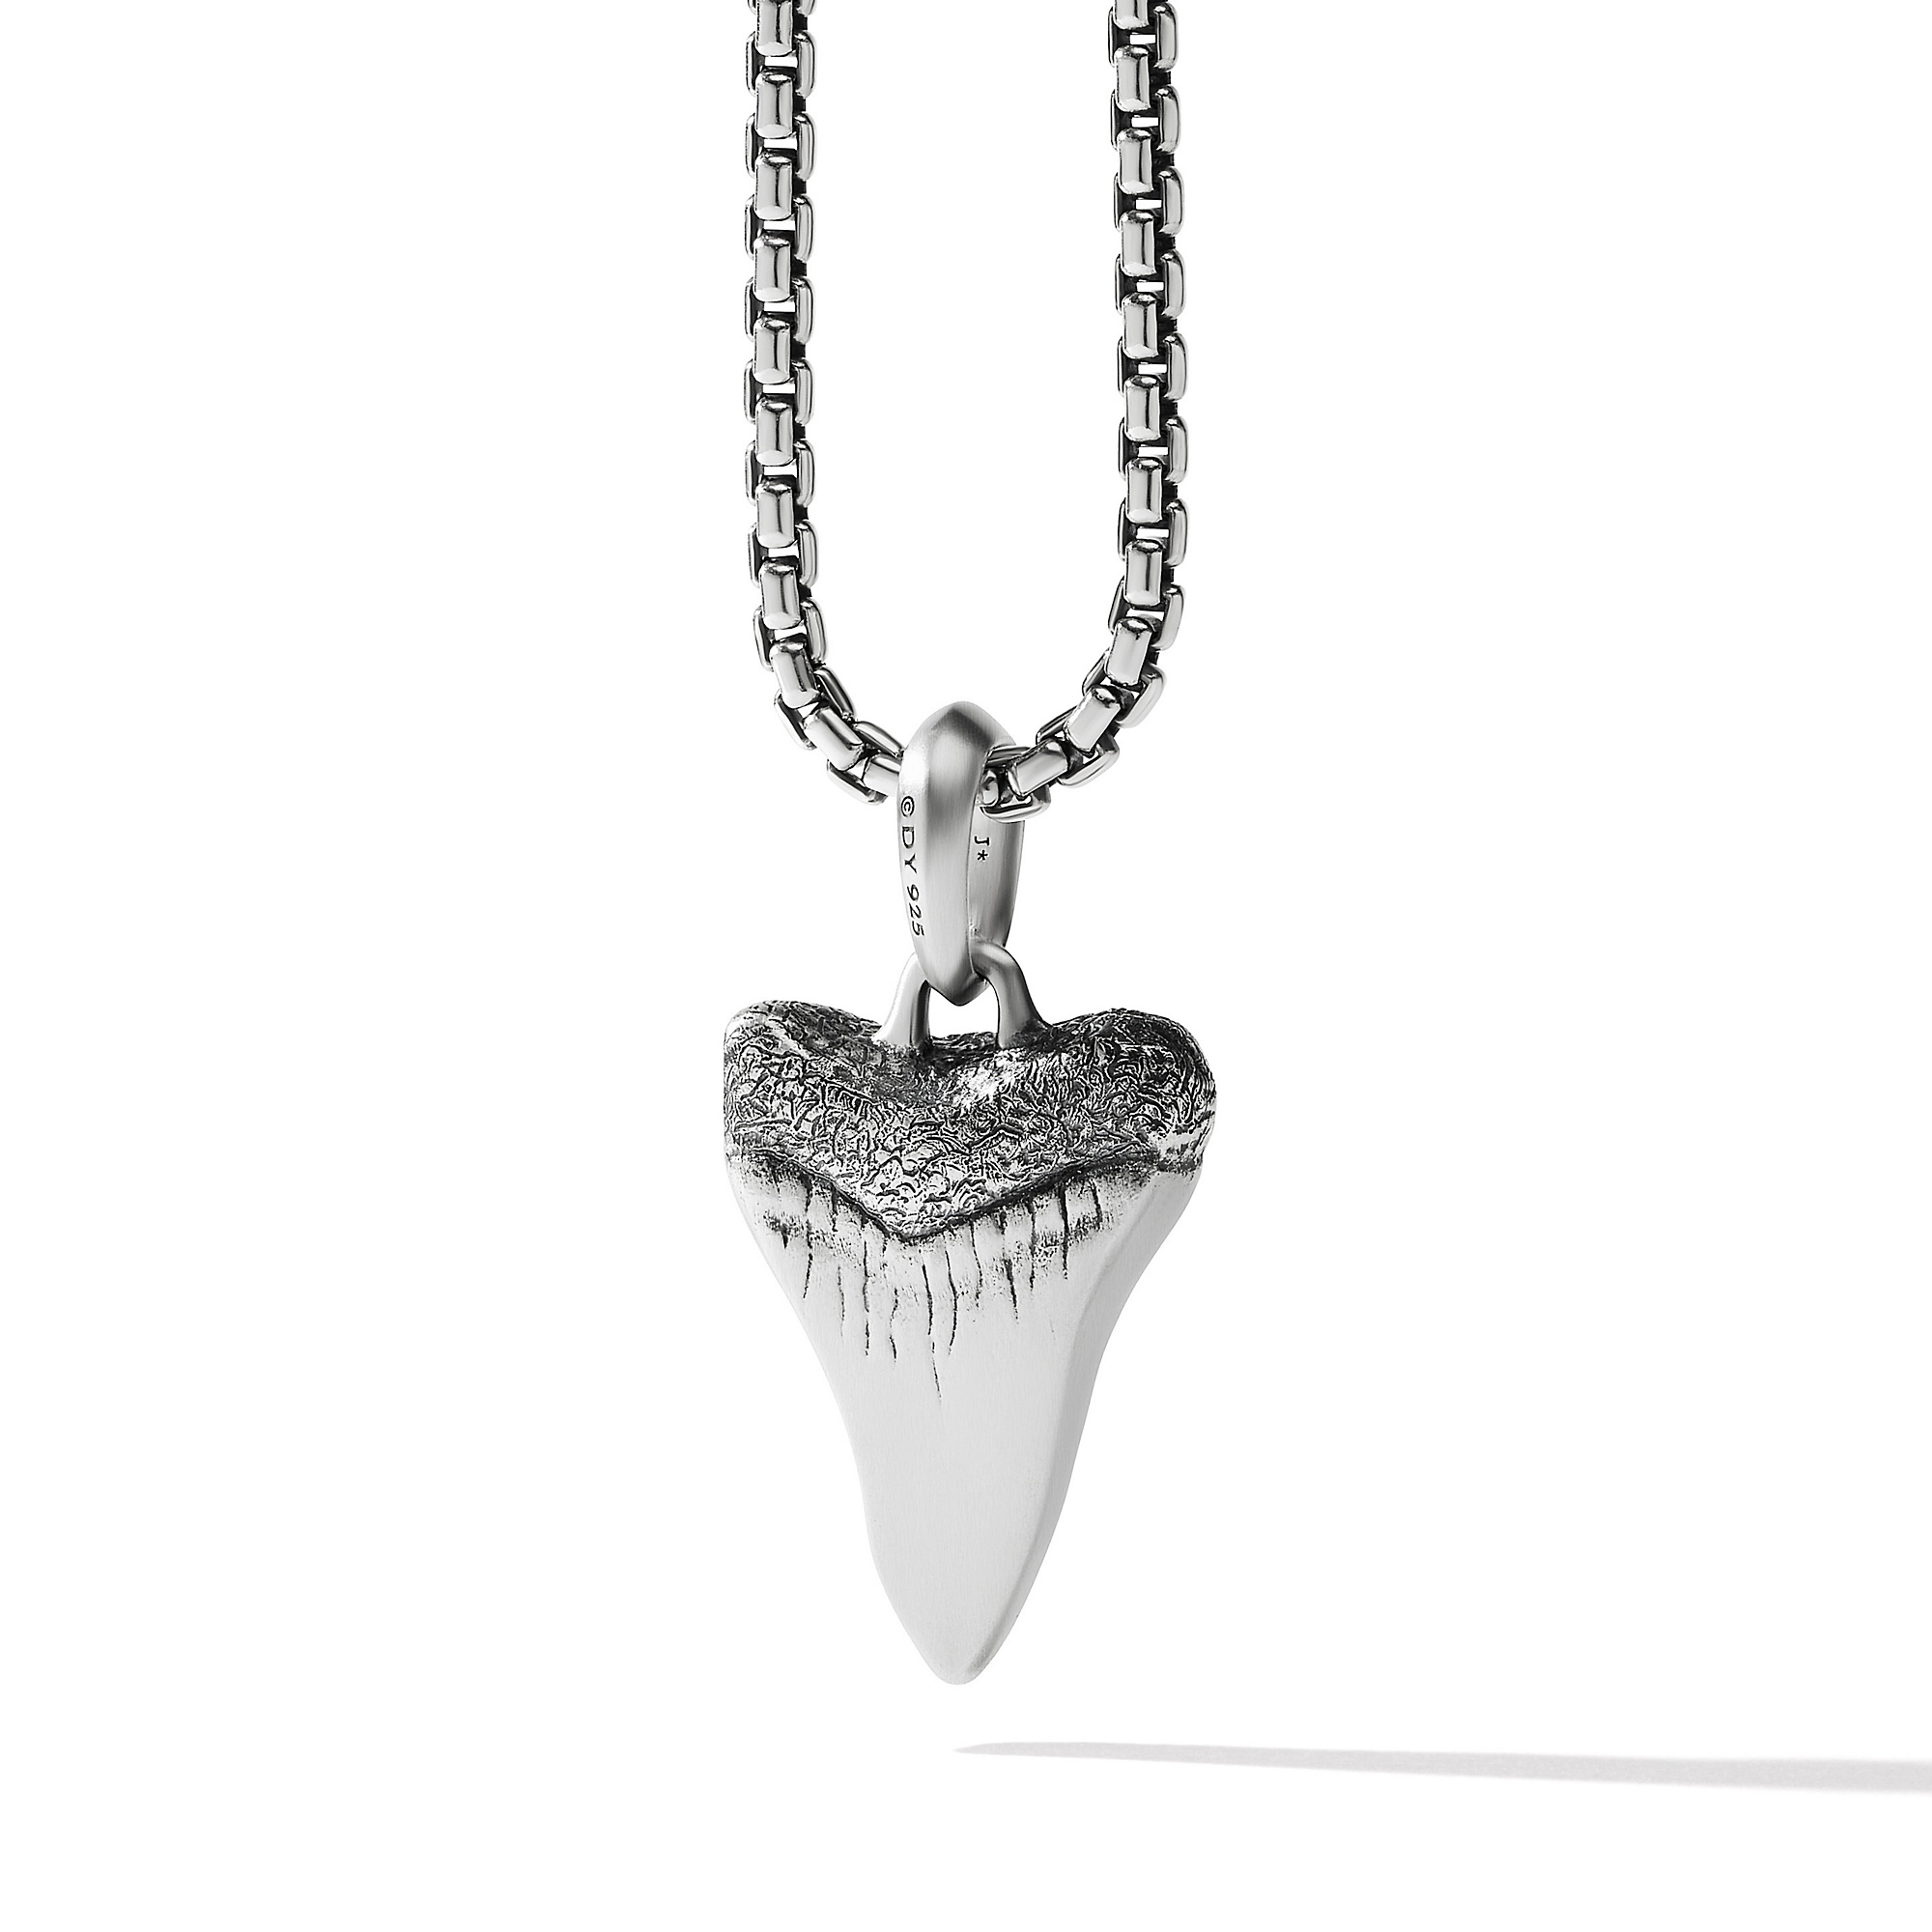 Shark Tooth Amulet in Sterling Silver